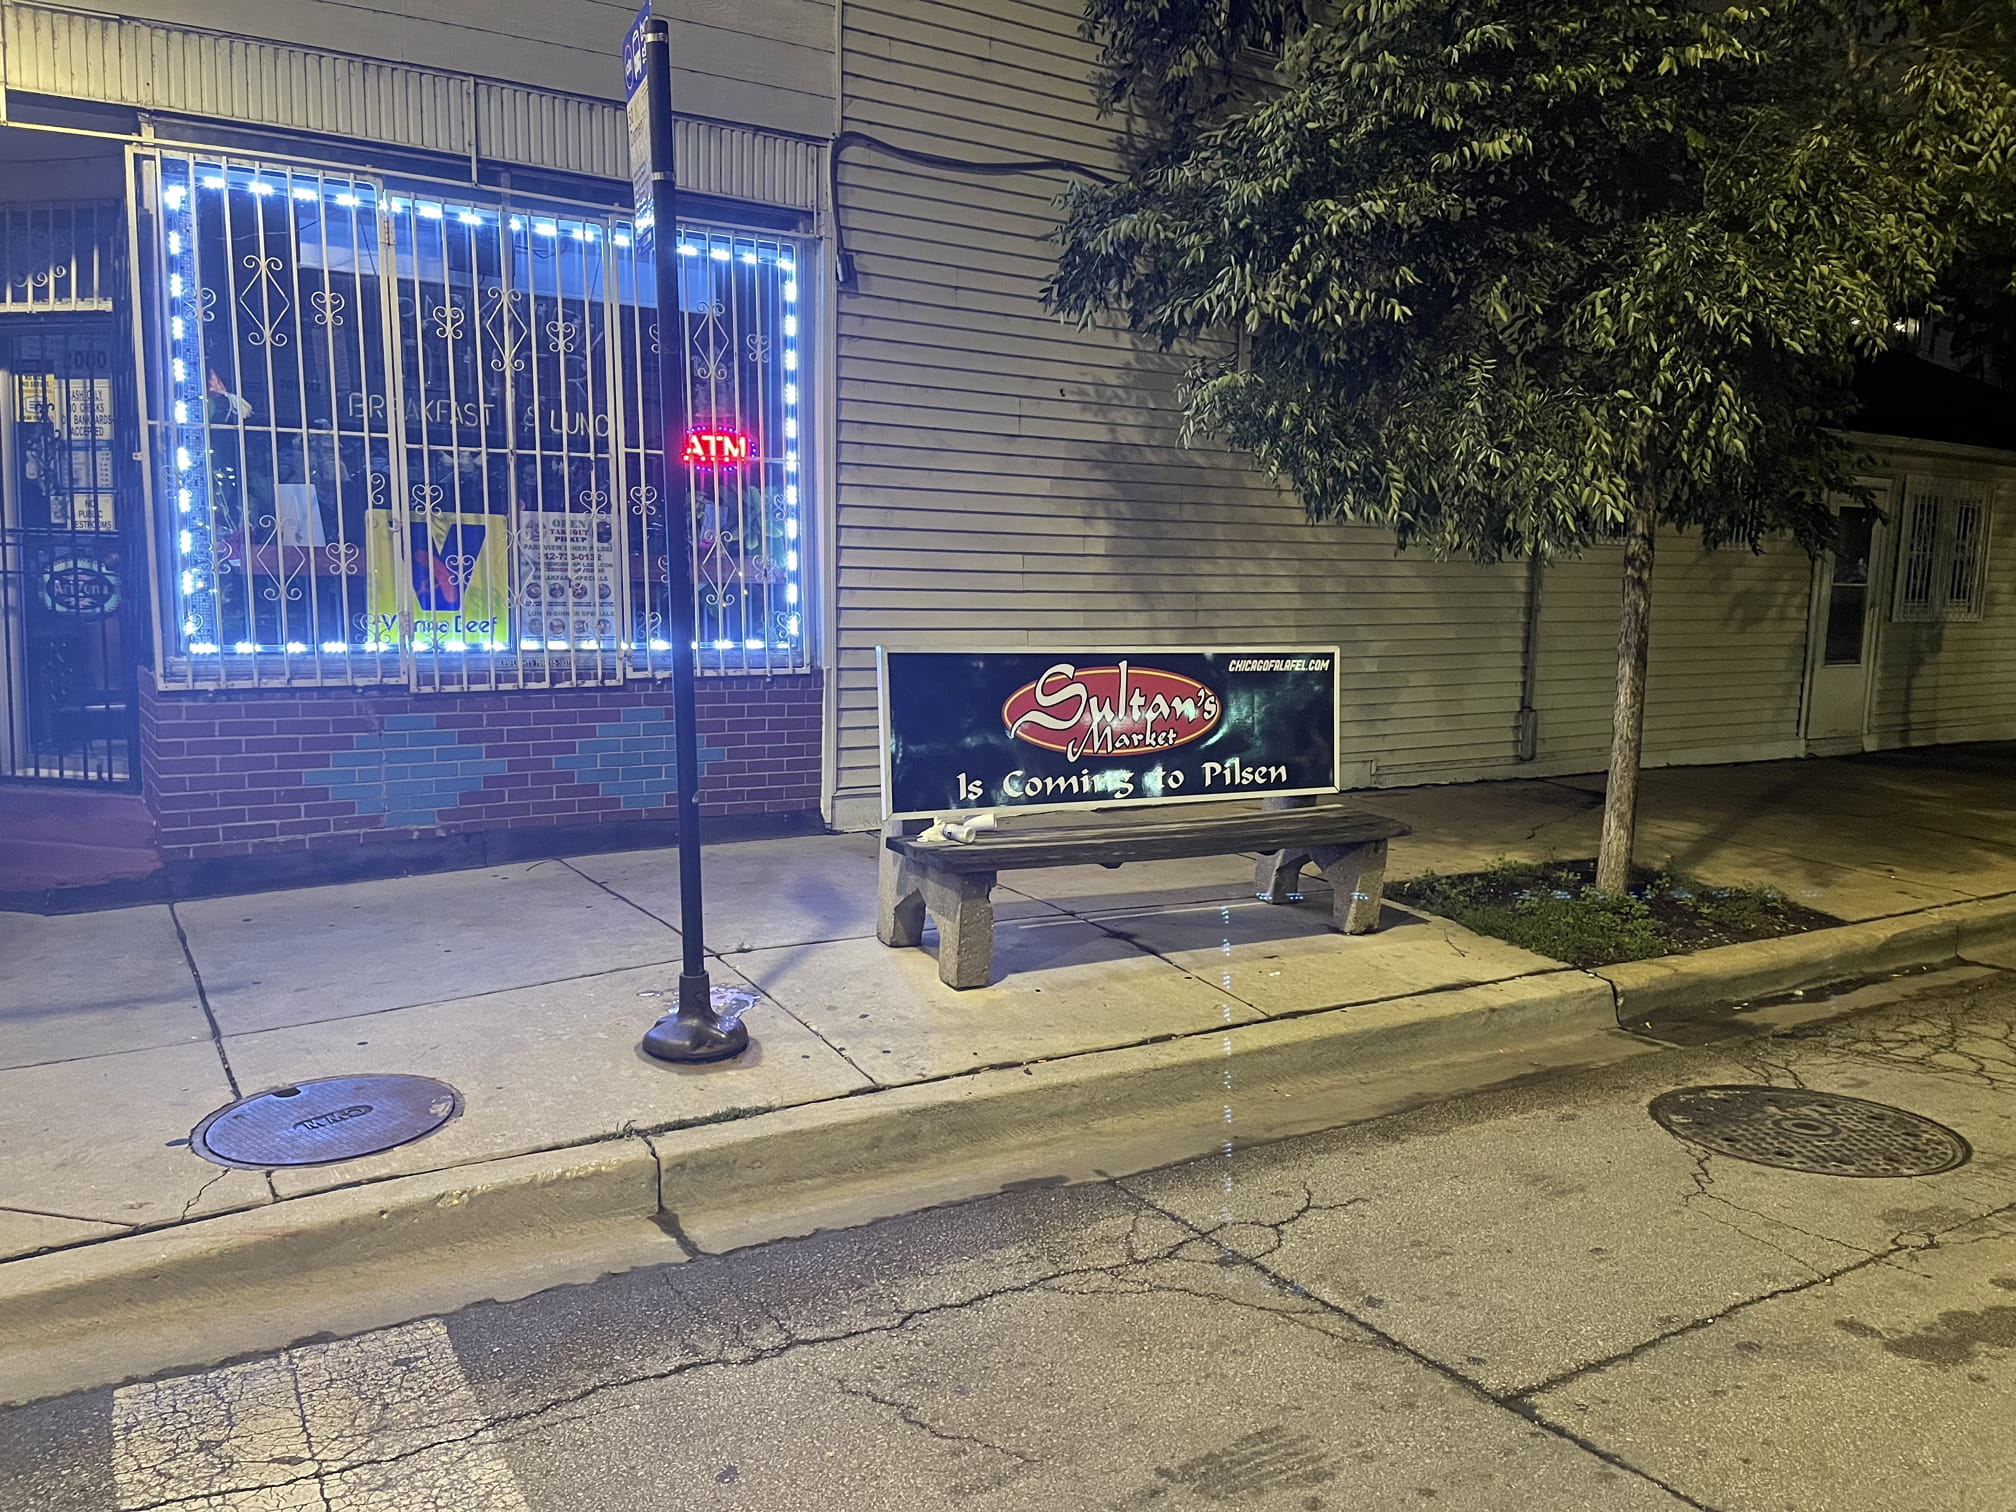 According to this bench, sultans market is coming to pilsen. Sign of gentrification? Signal that yuppies are here? And the population is growing? Damen and 19th.